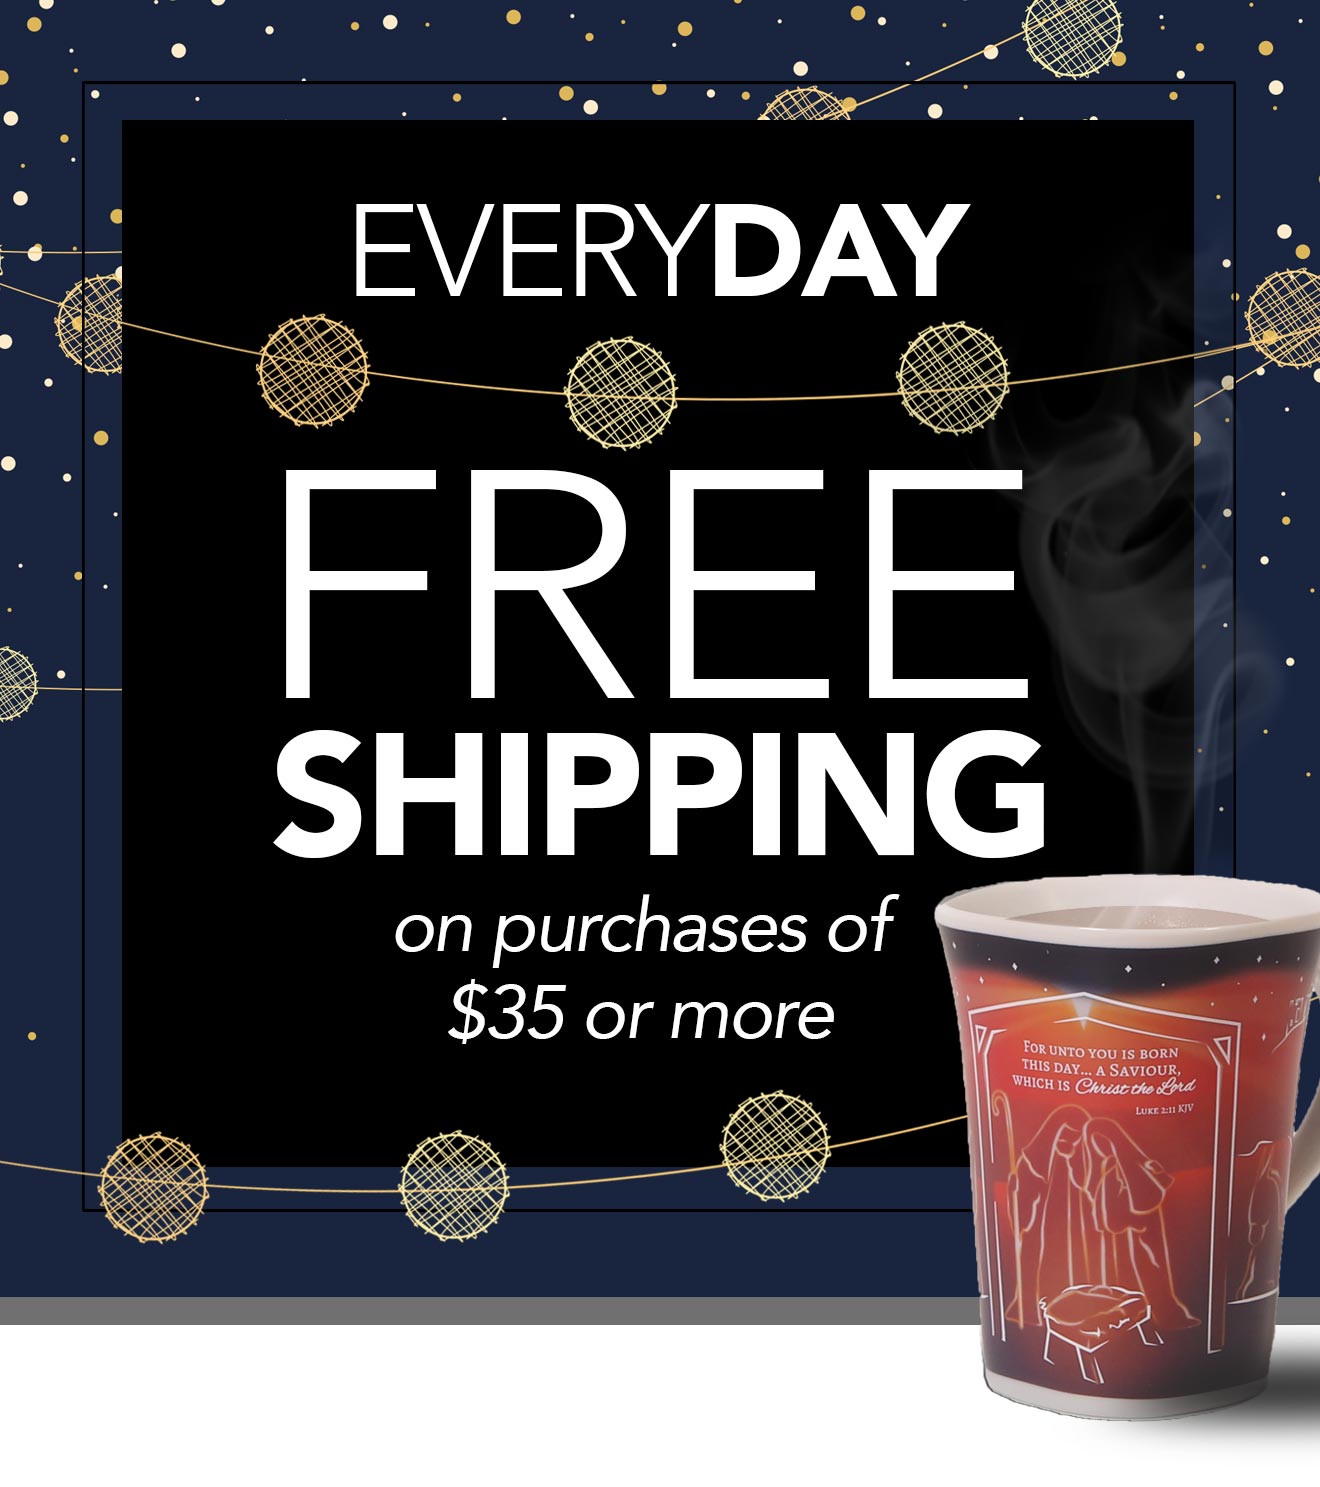 Free Shipping on purchases of $35 or more